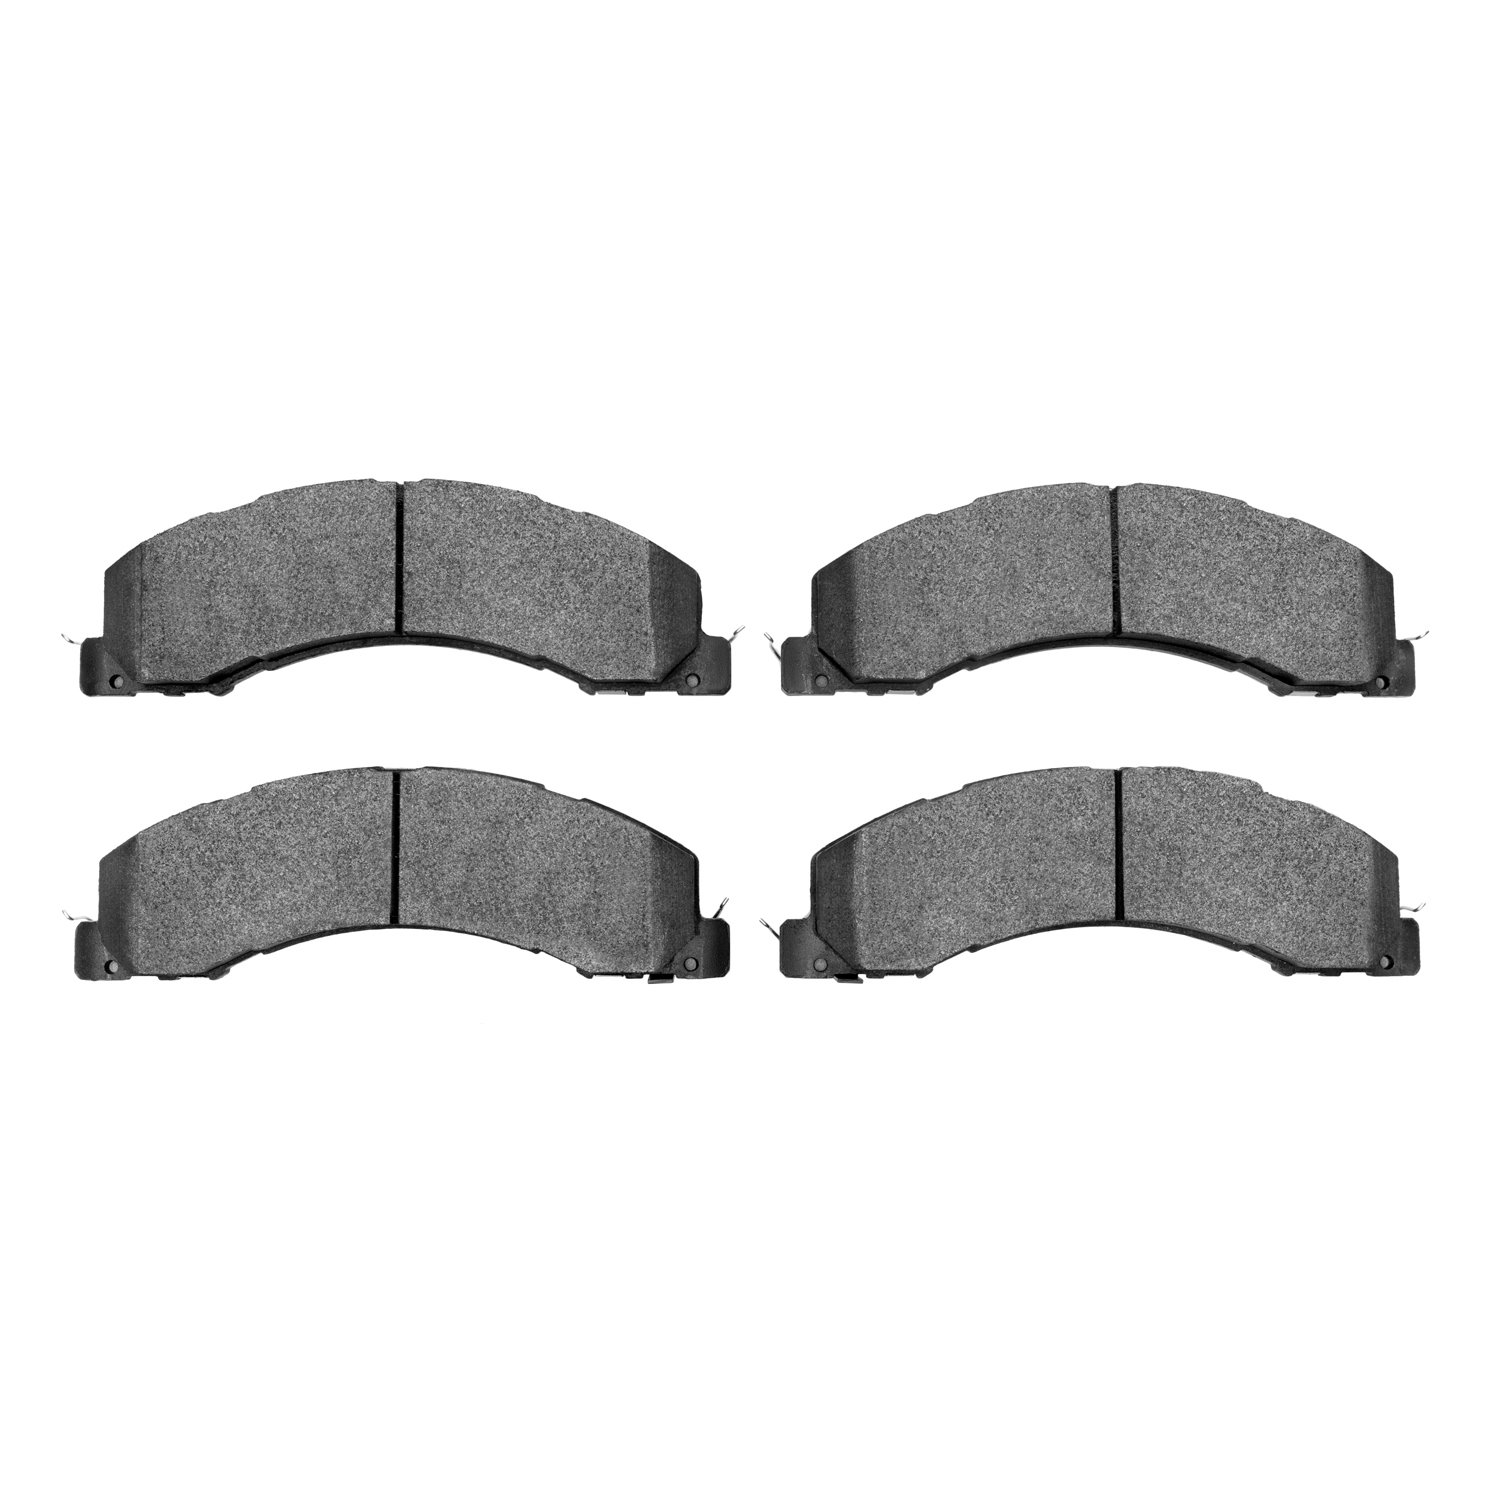 1311-1335-00 3000-Series Semi-Metallic Brake Pads, Fits Select Multiple Makes/Models, Position: Rear,Fr & Rr,Front